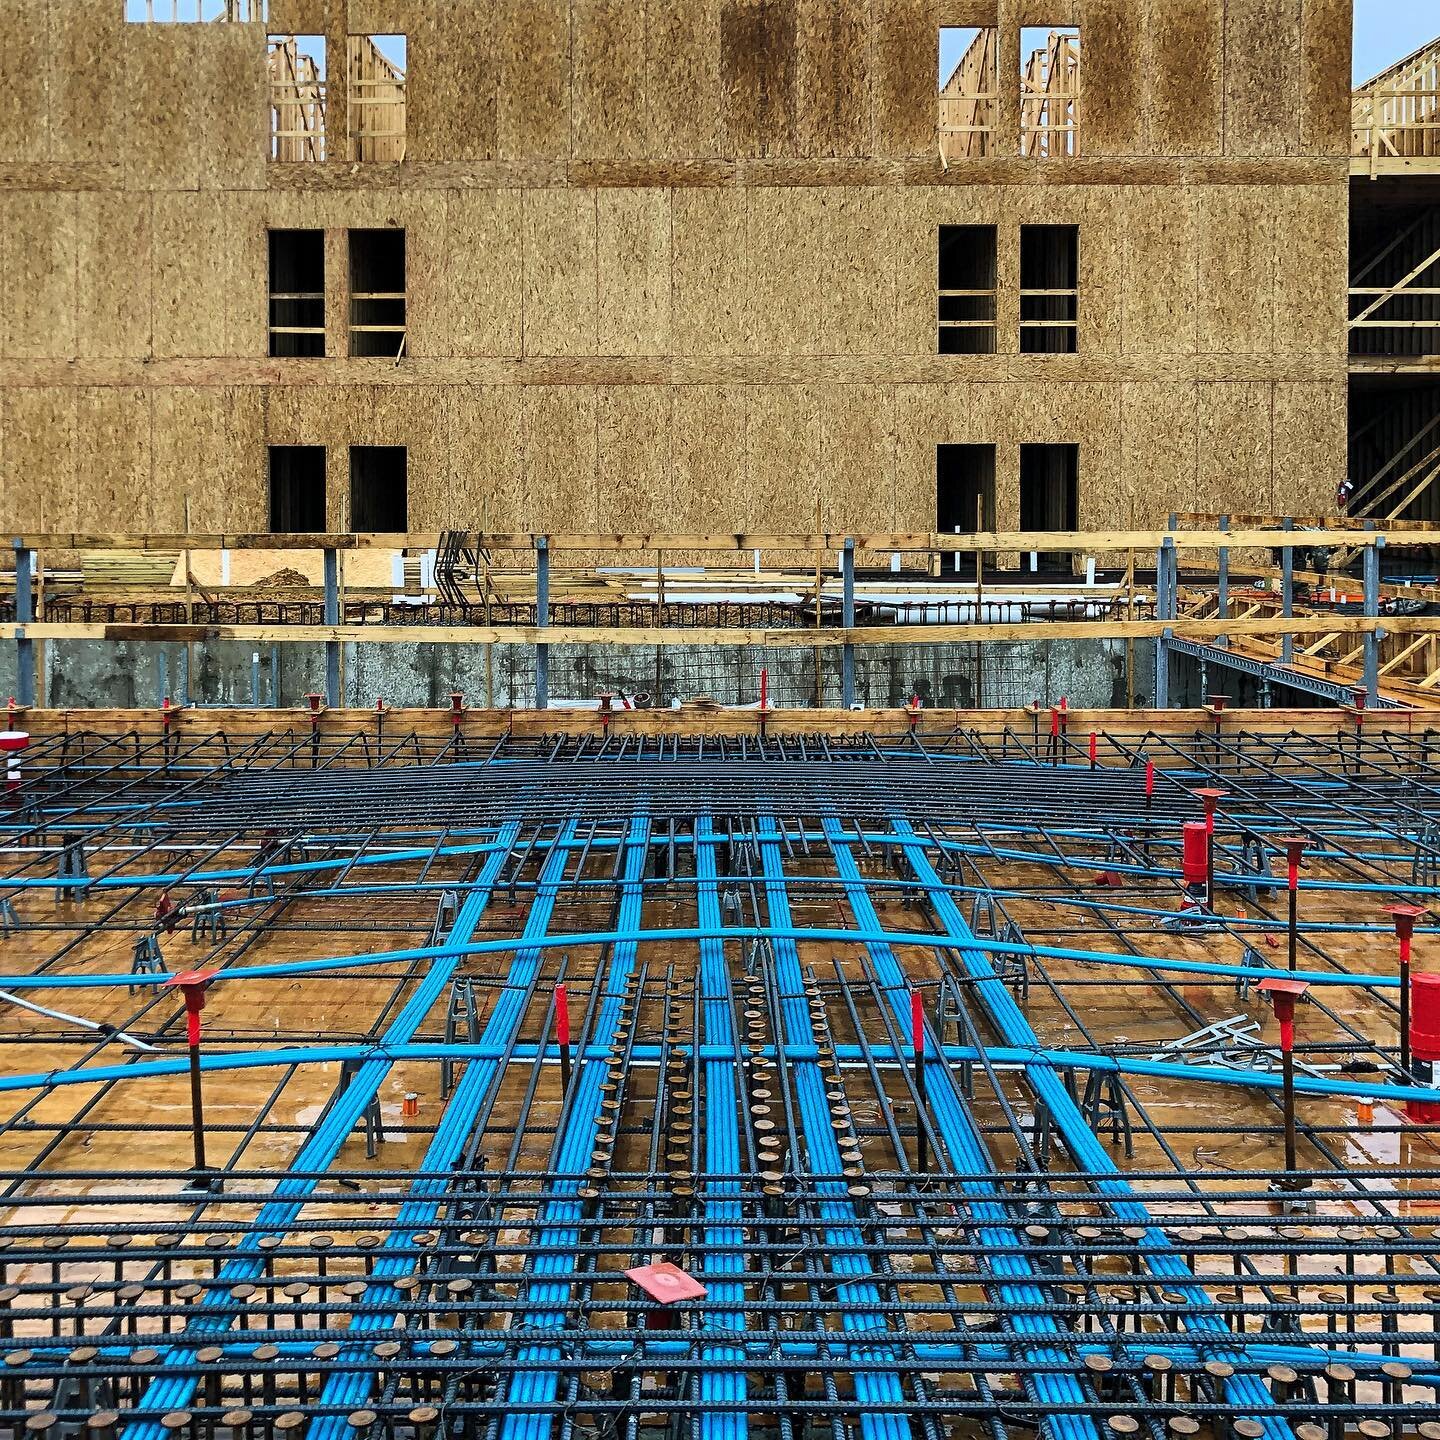 Post-Tension slab reinforcement being installed prior to the concrete pour on Museum Lofts in Downtown Memphis.